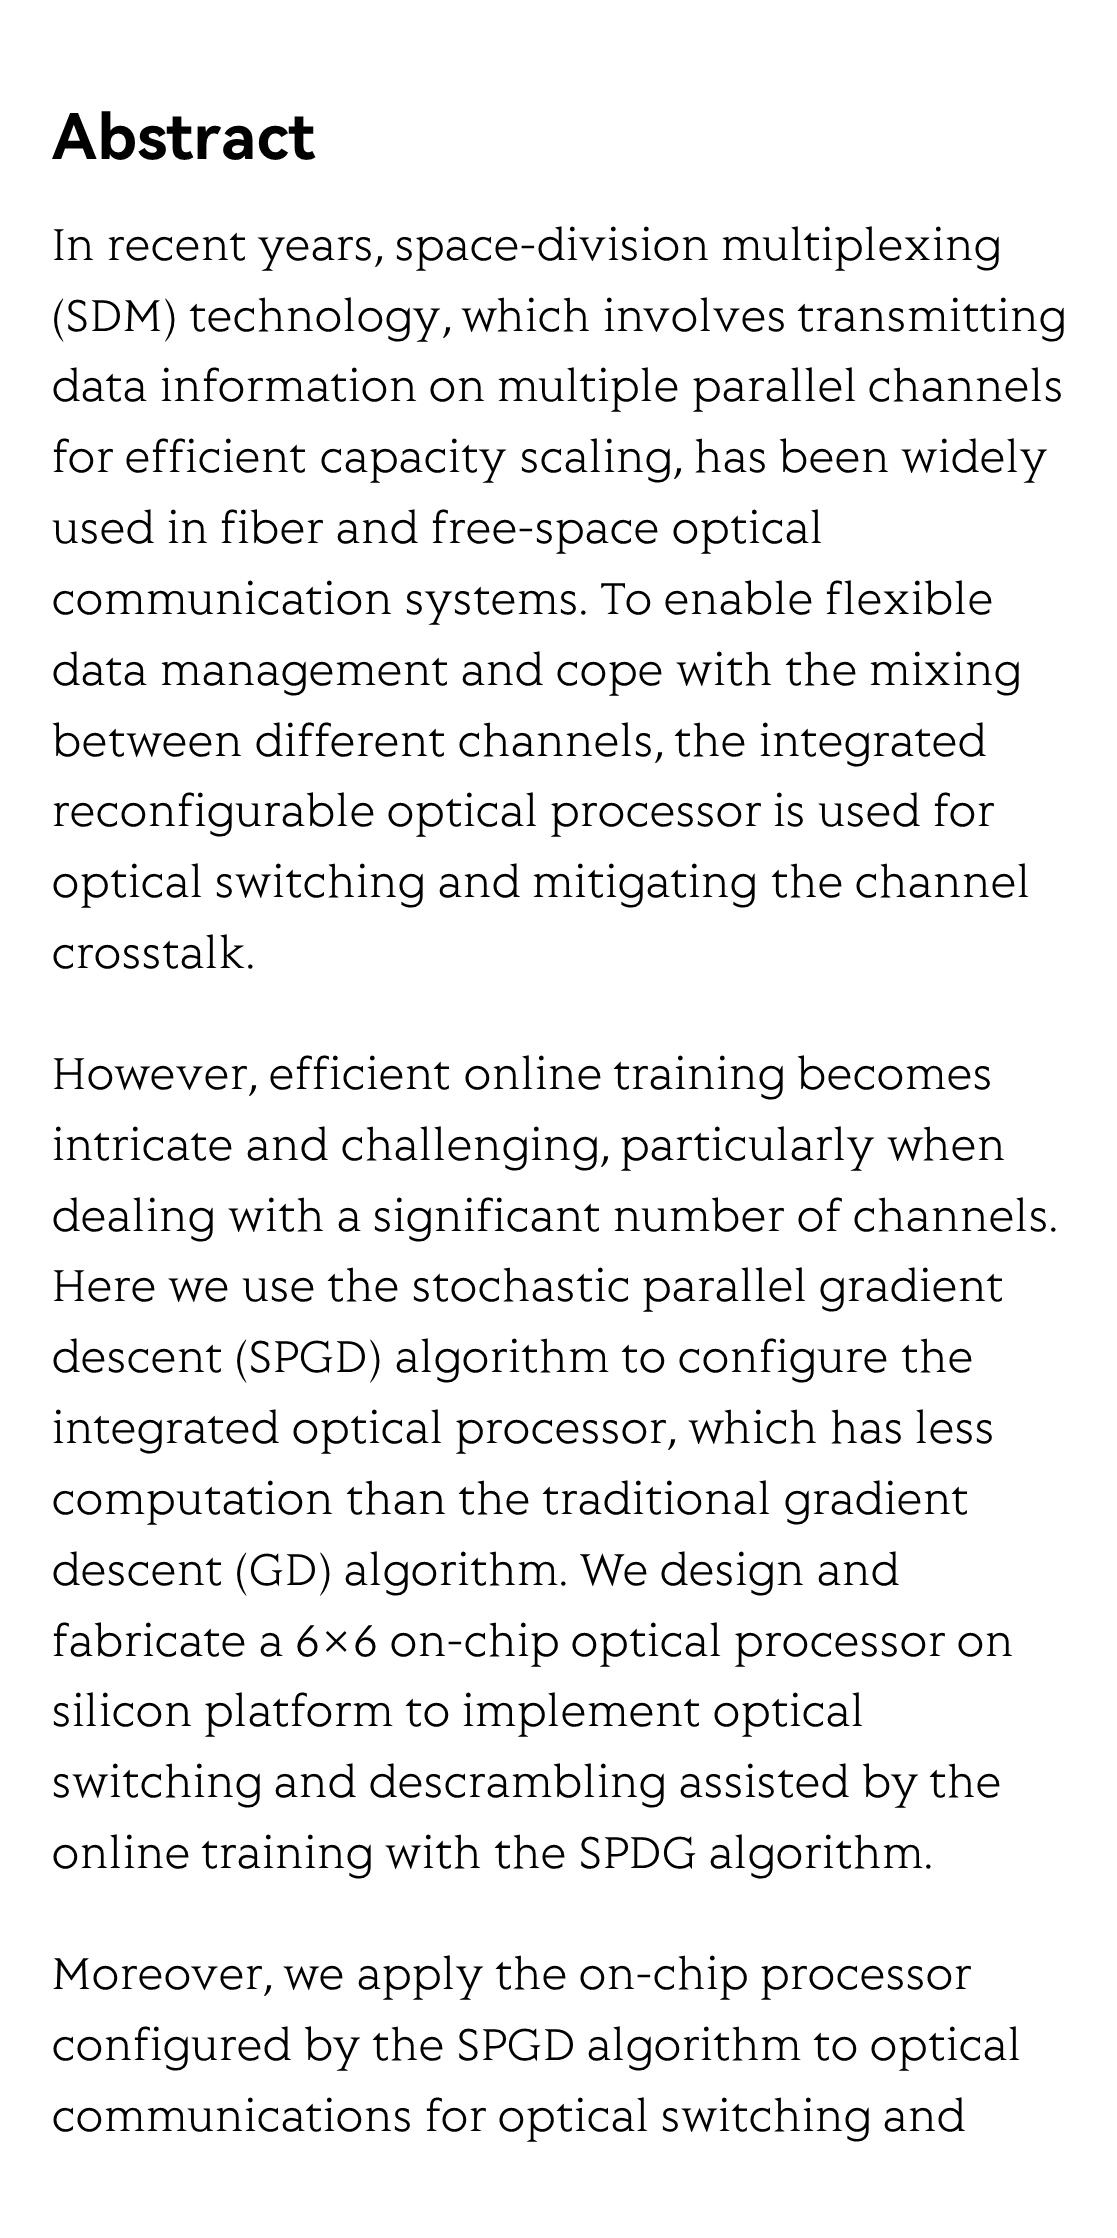 Efficient stochastic parallel gradient descent training for on-chip optical processor_2